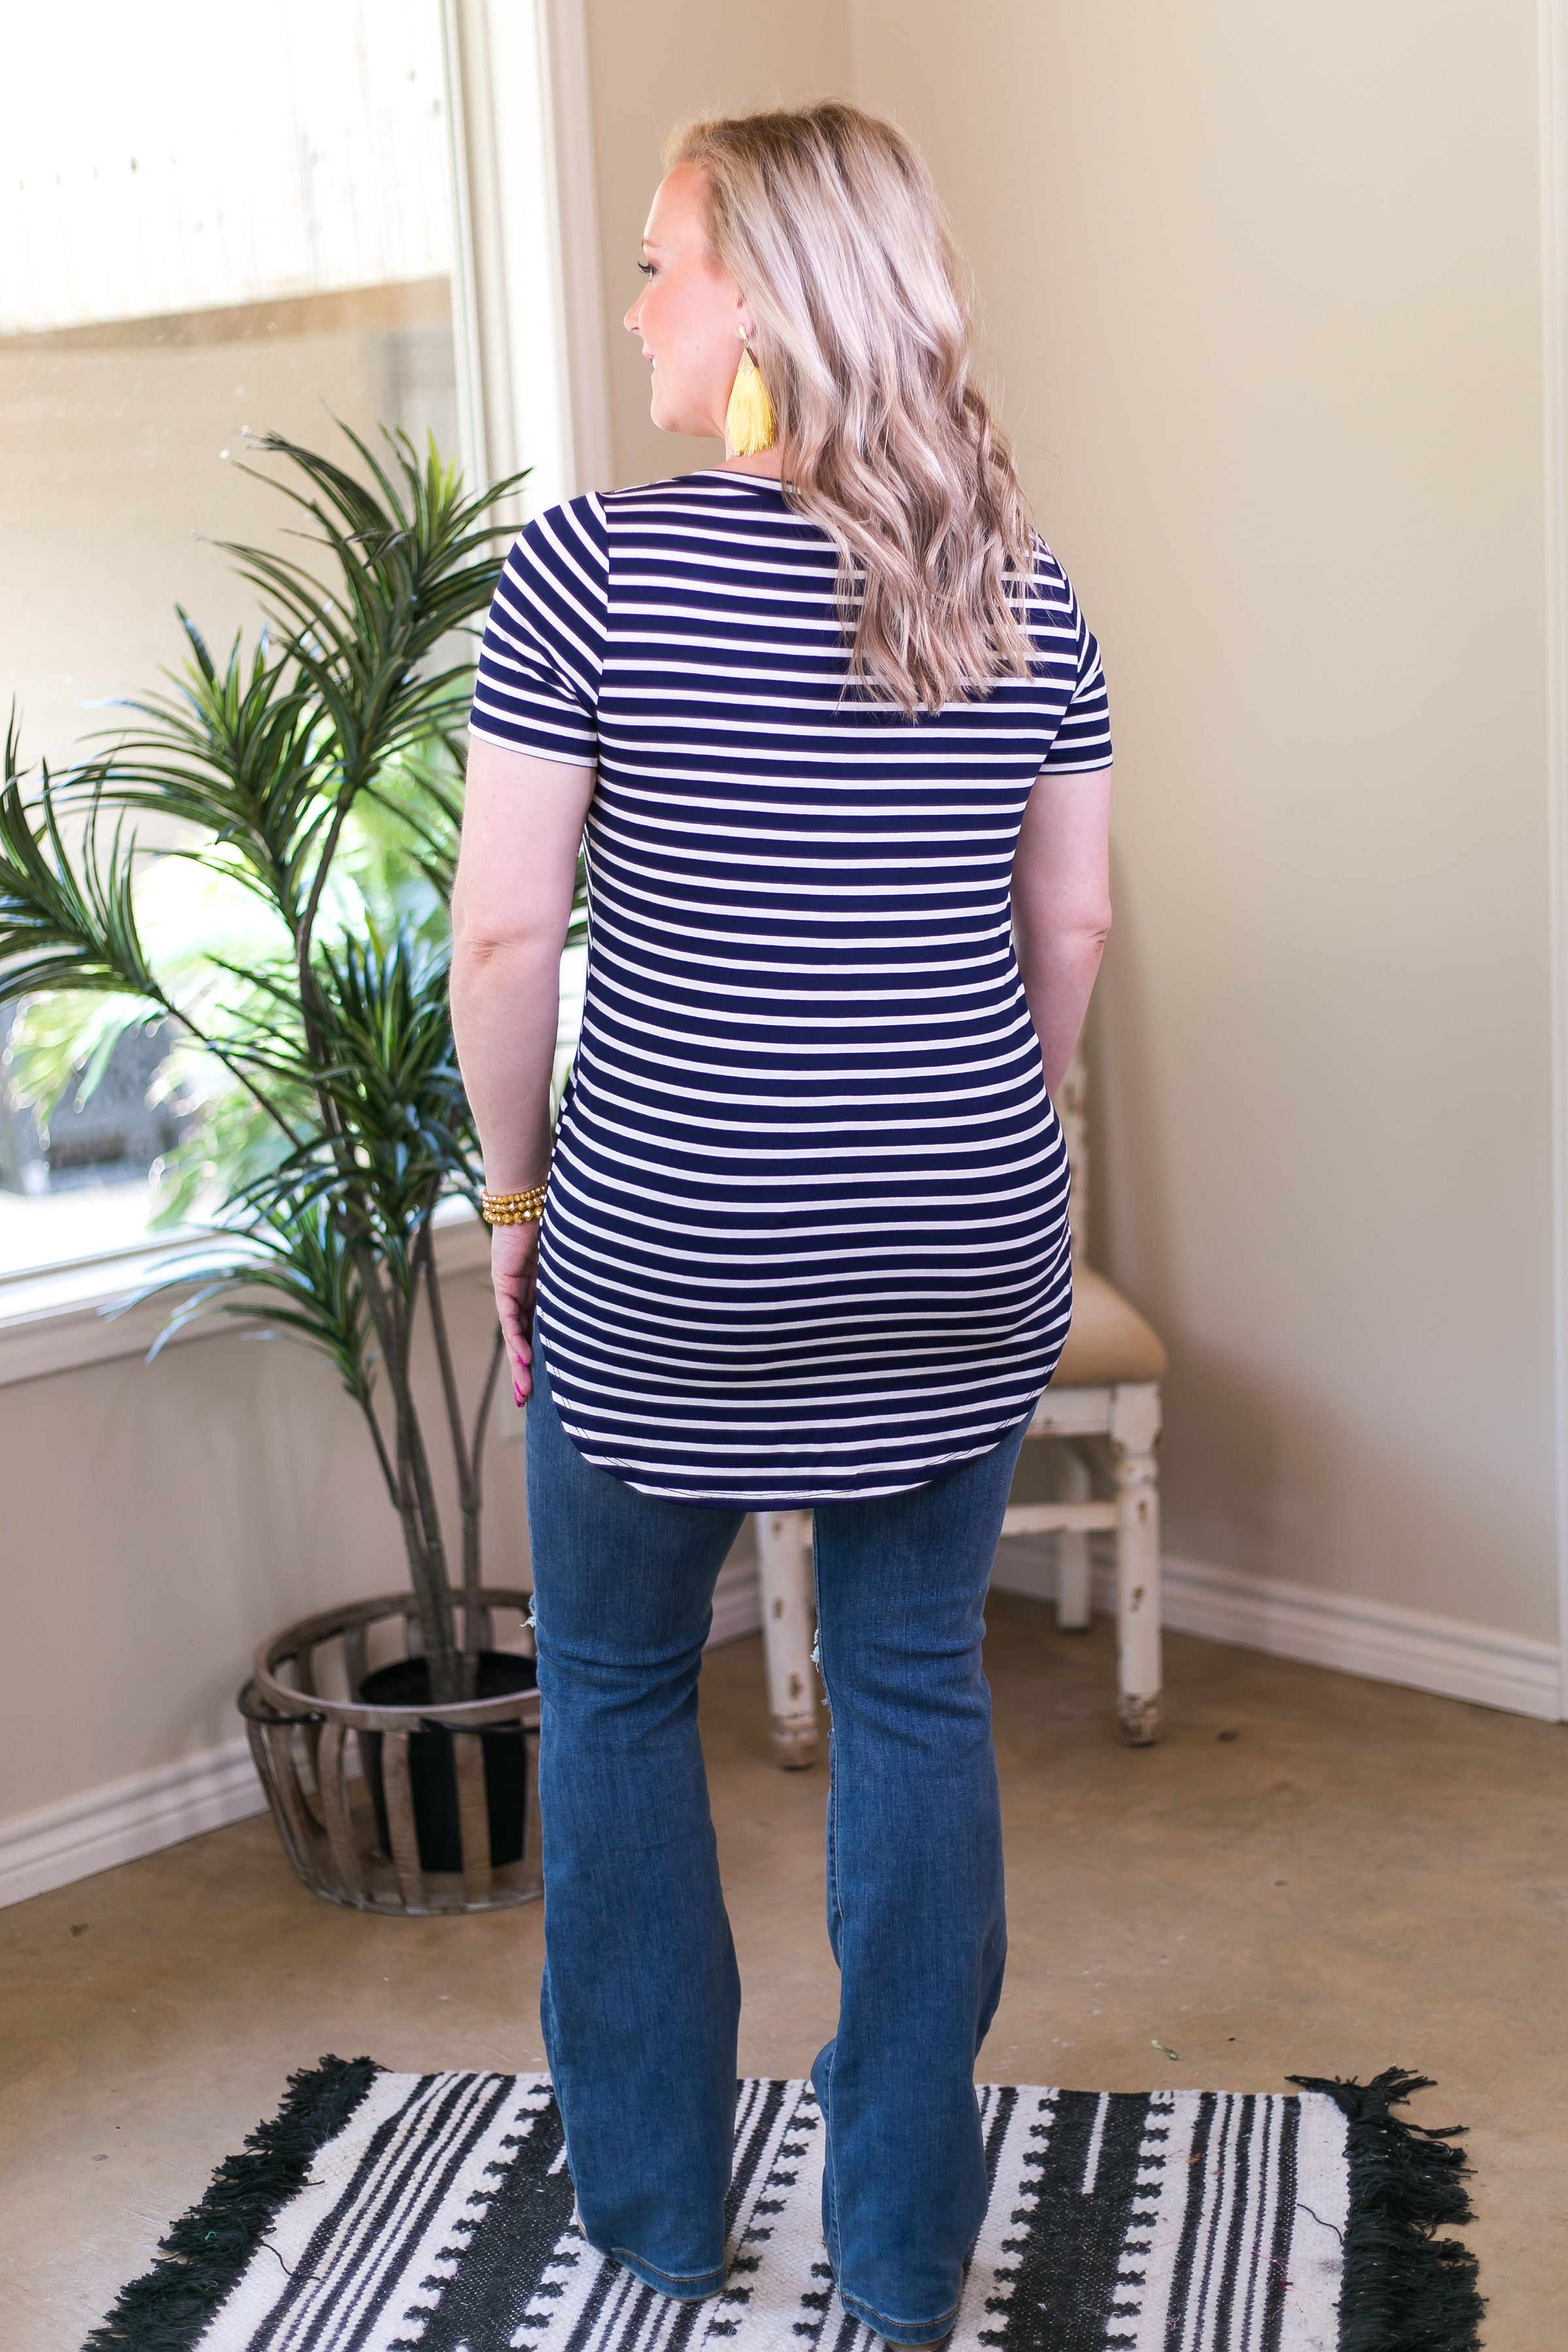 Simply The Best Striped V Neck Short Sleeve Tee Shirt in Navy Blue - Giddy Up Glamour Boutique